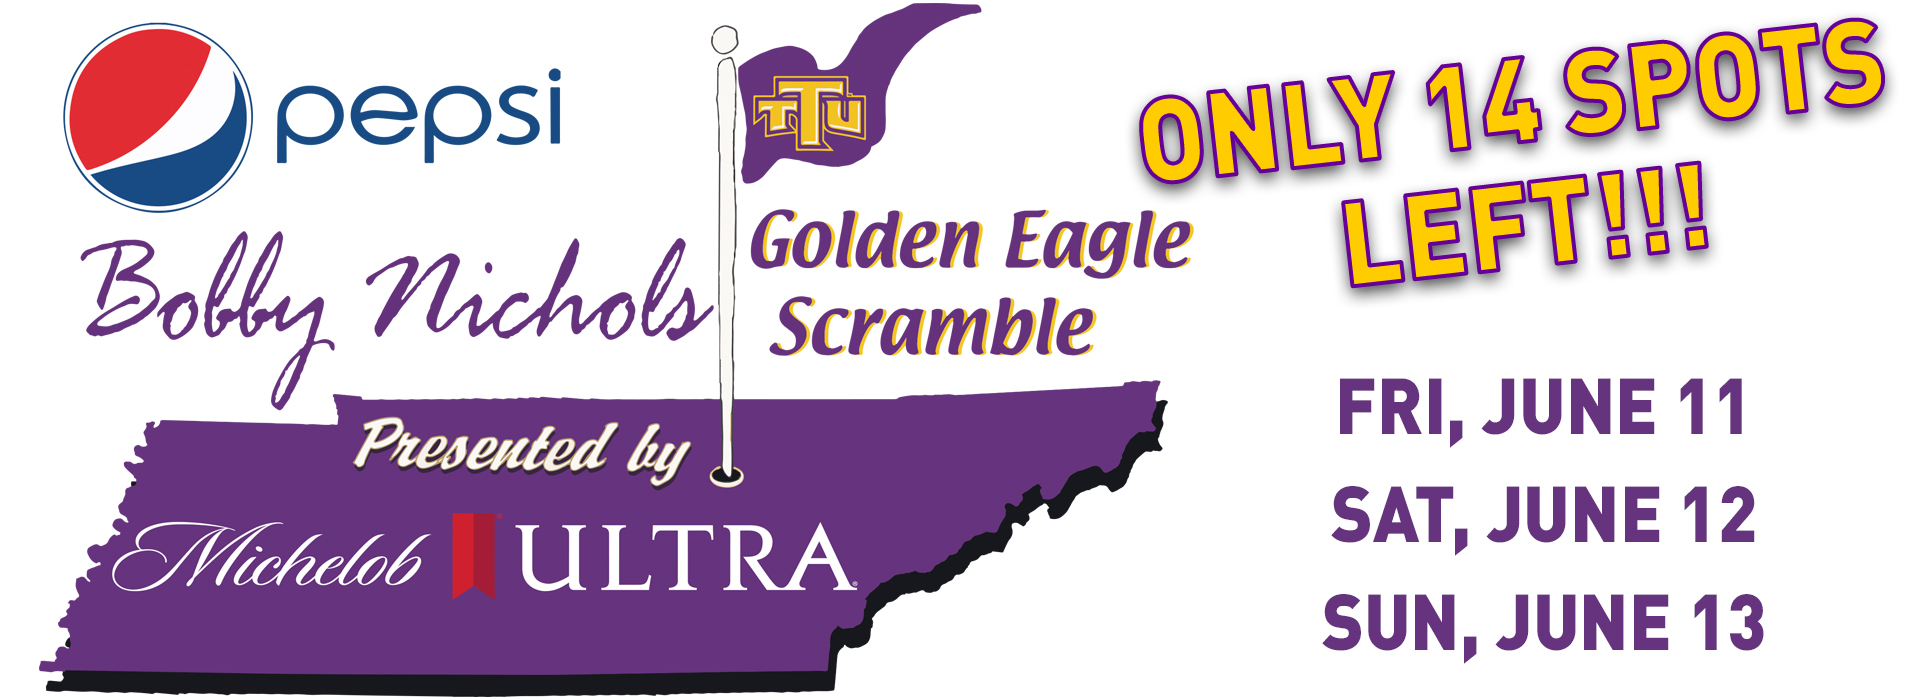 Just 14 spots remain for 2021 Pepsi Bobby Nichols Golden Eagle Scramble presented by Michelob Ultra